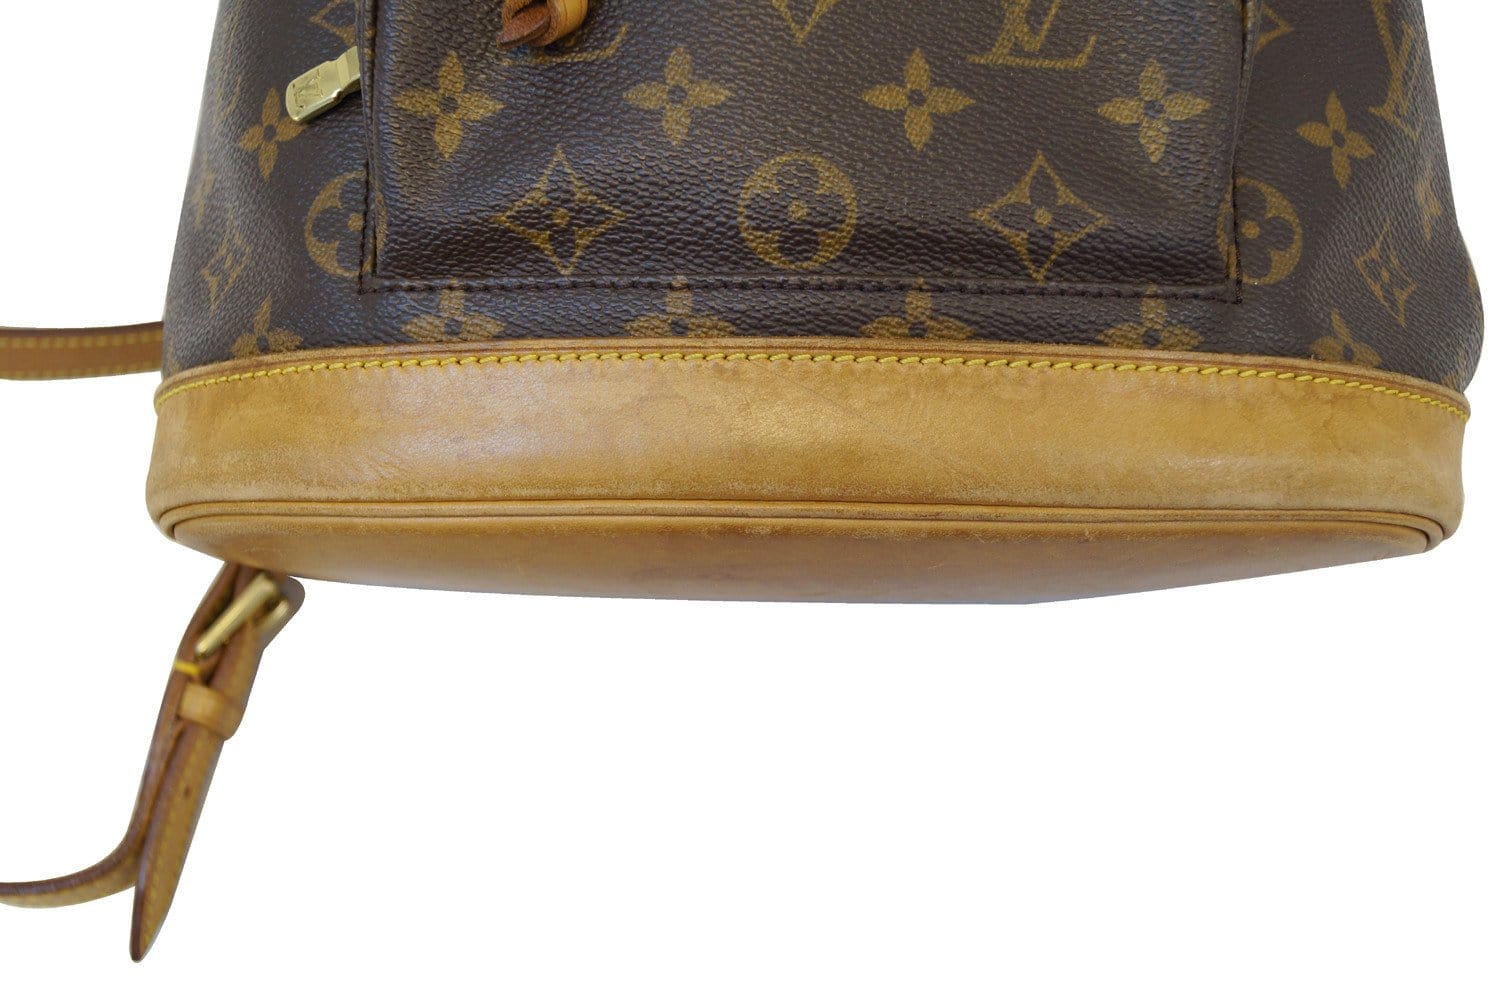 Auth LOUIS VUITTON Monogram Montsouris MM Backpack M51135 United State  18662707